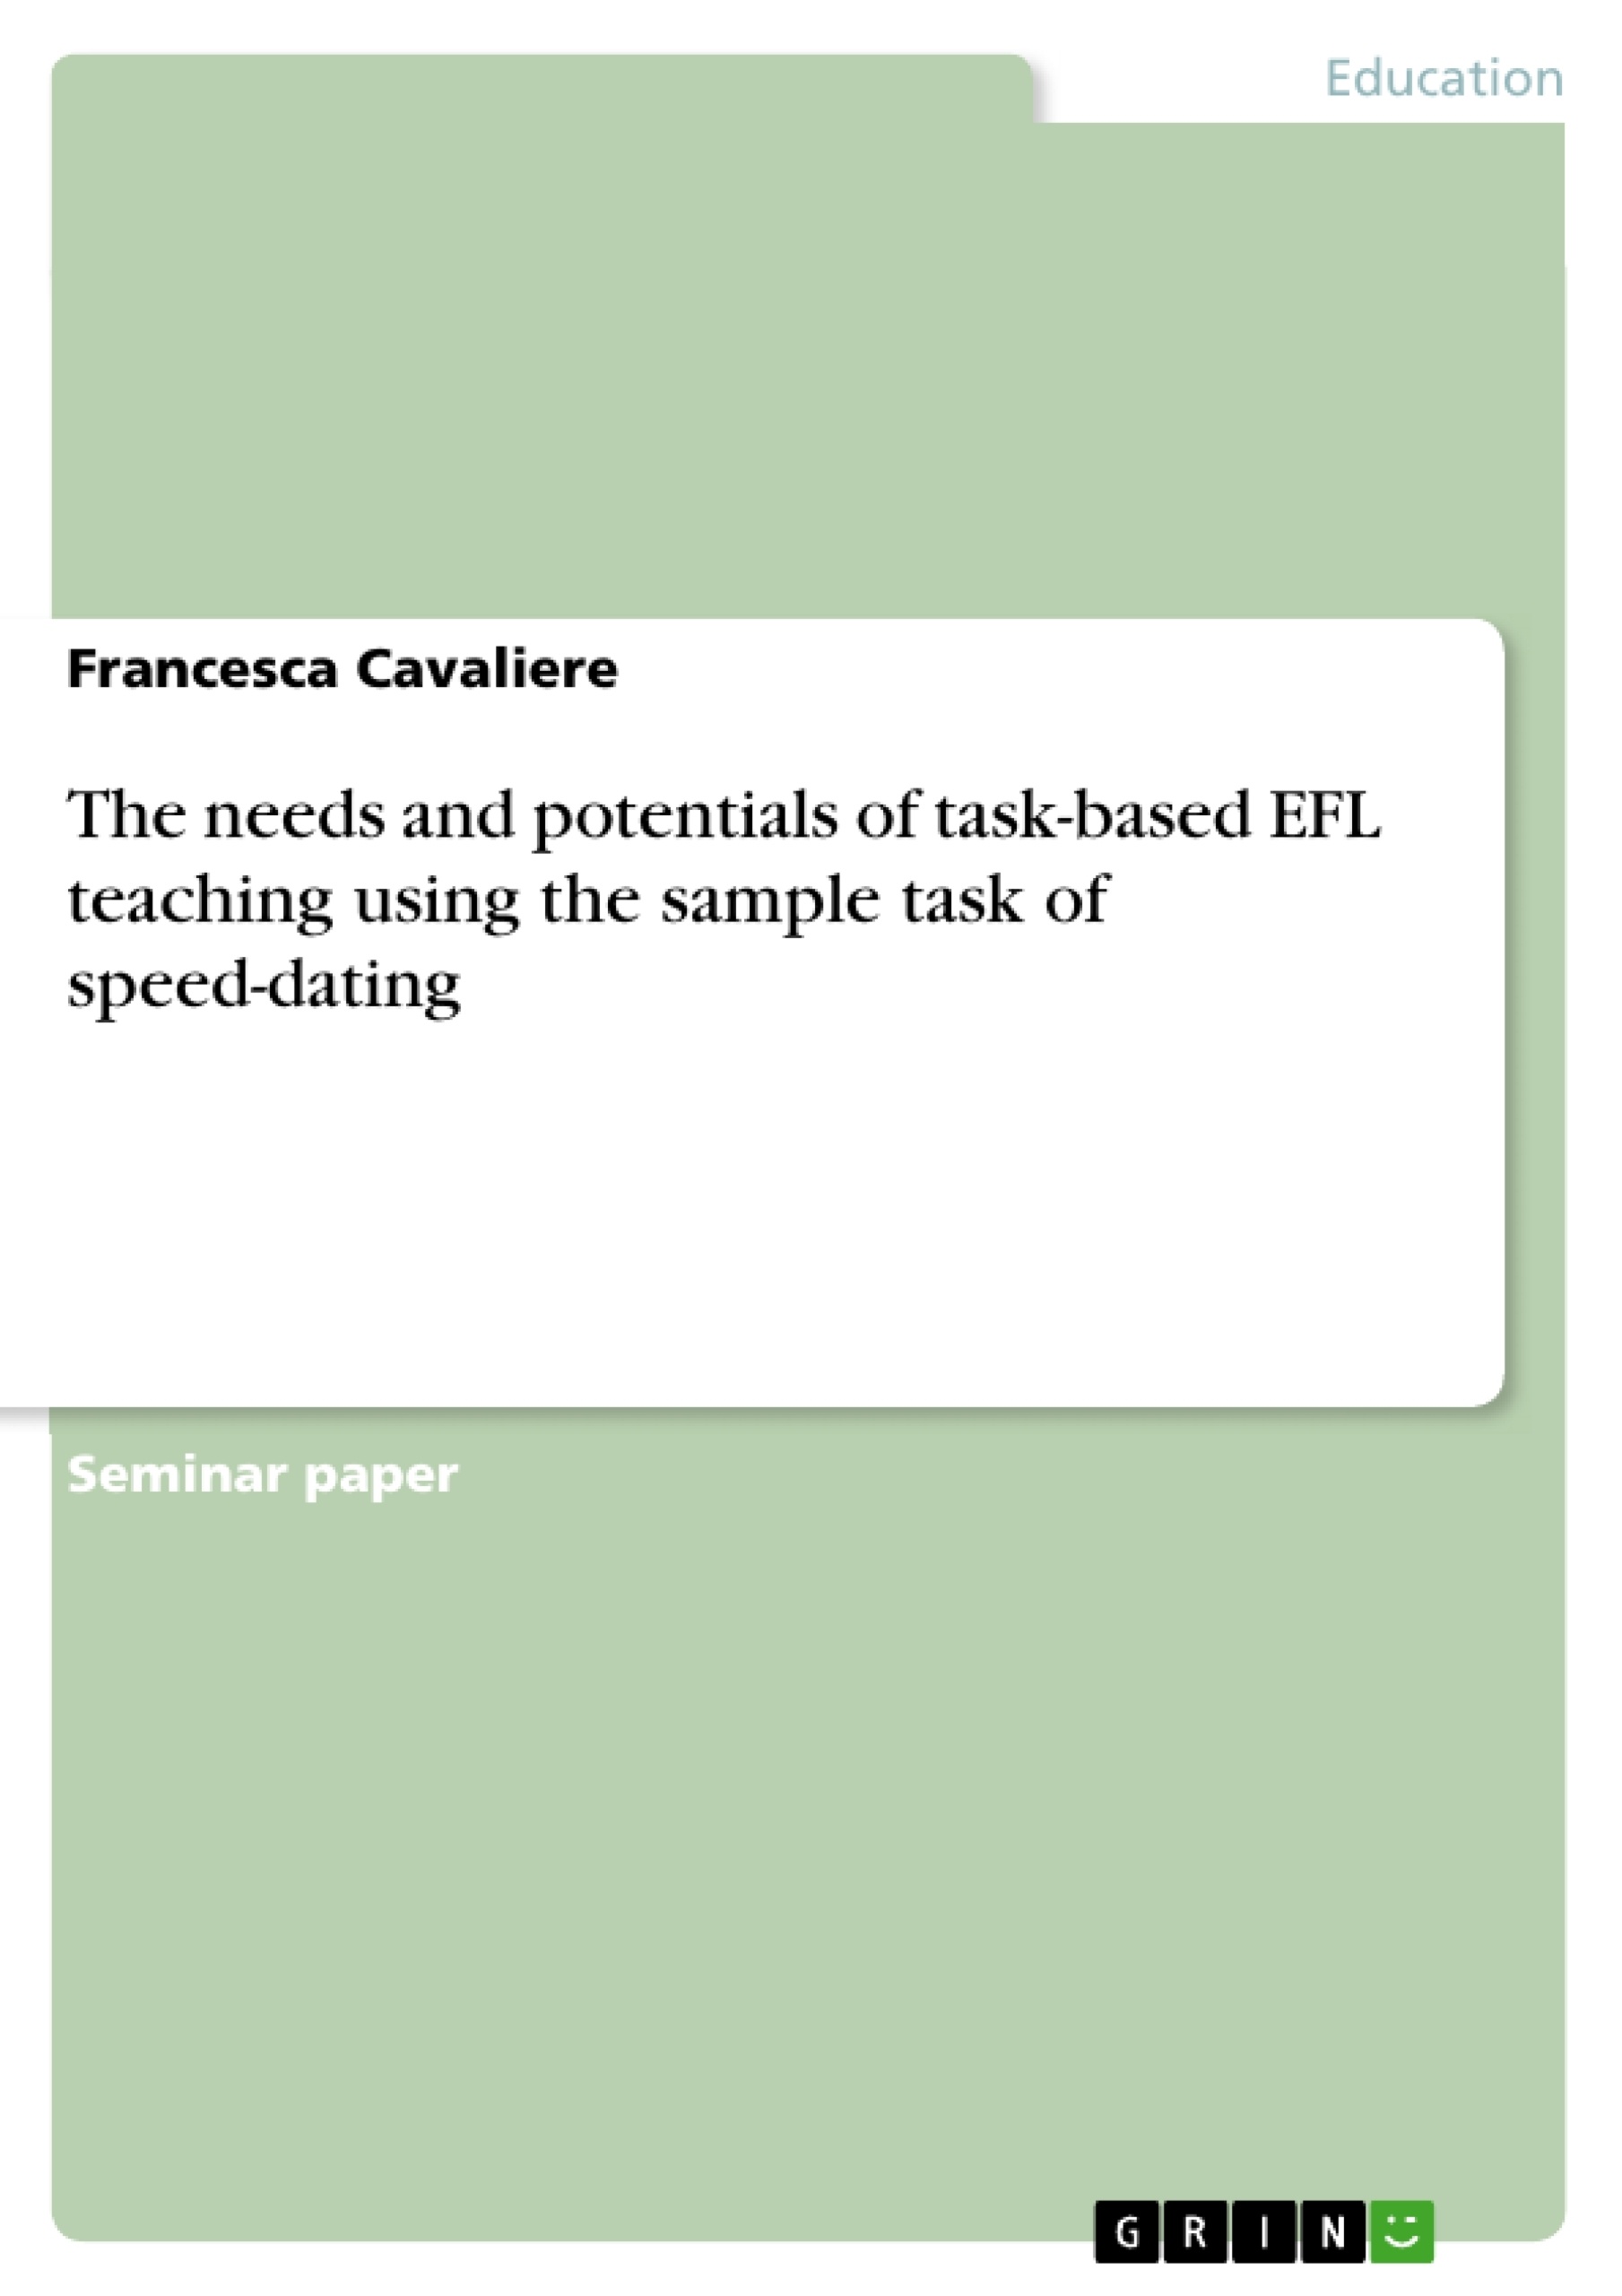 Título: The needs and potentials of  task-based EFL teaching using the sample task of speed-dating